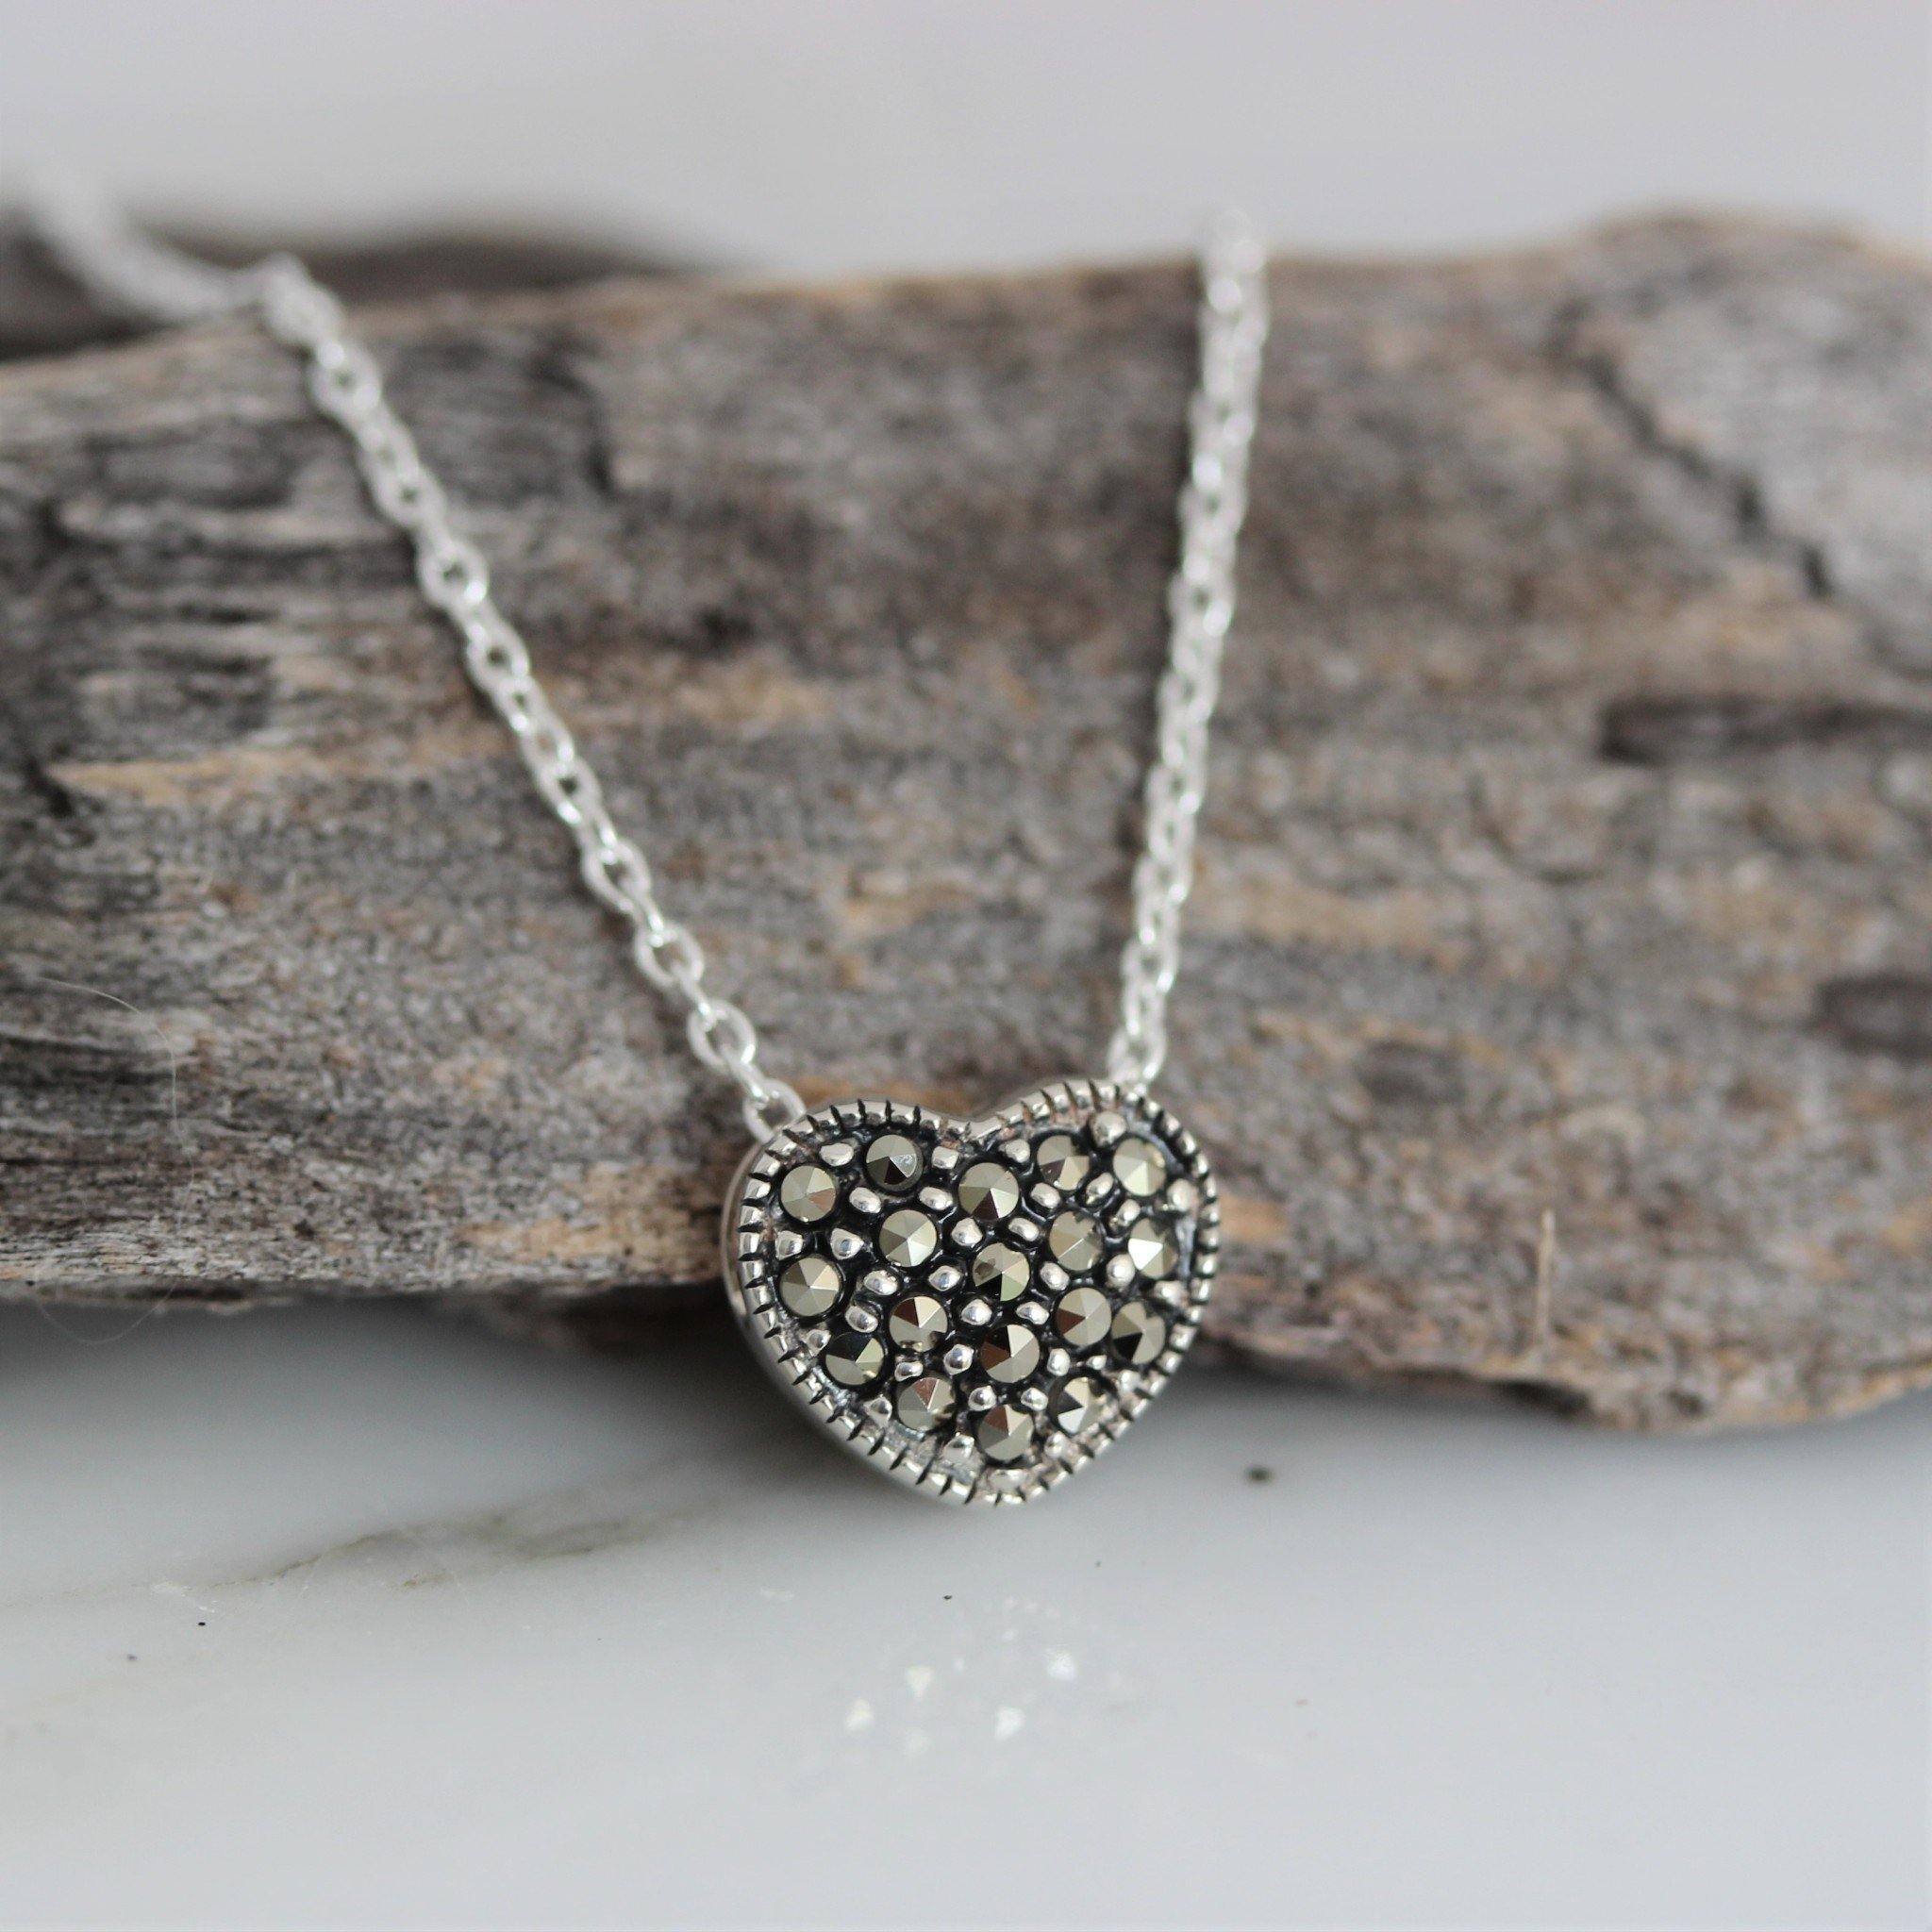 Sterling Silver Marcasite Small Heart Necklace Slider Pendant 42+3cm Length - STERLING SILVER DESIGNS